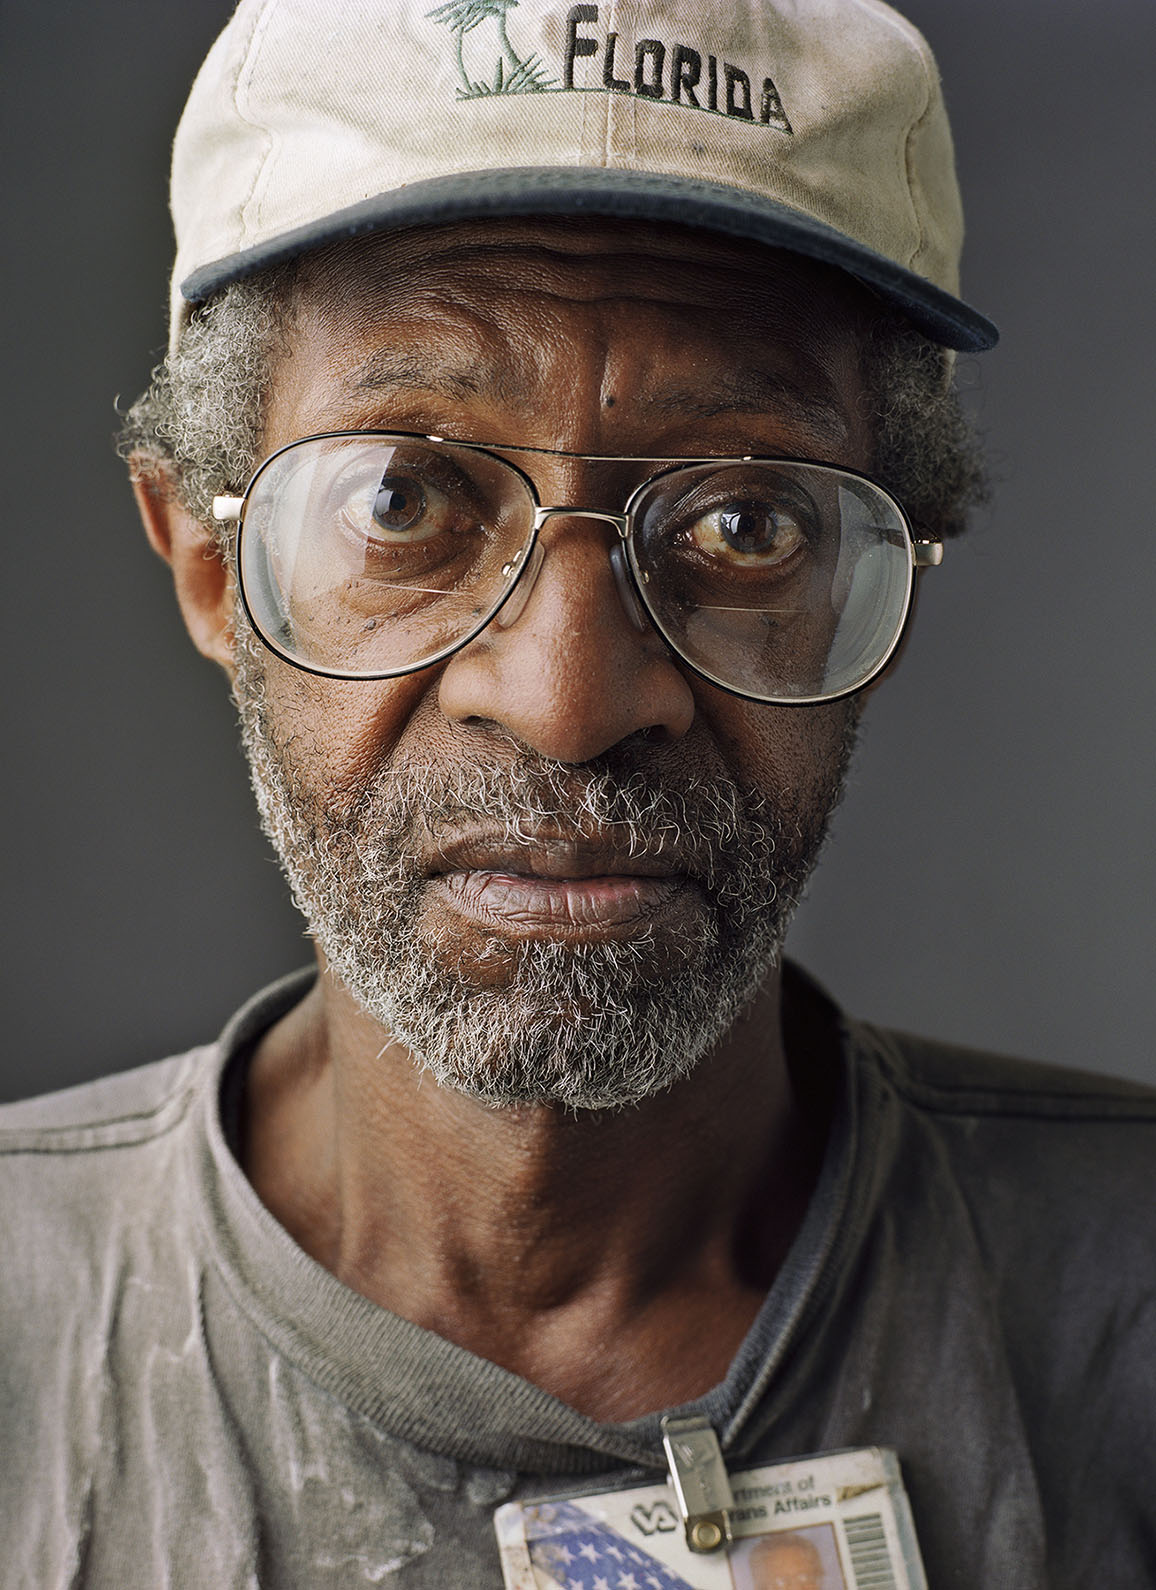 USA. "Down and Out in the South": Studio portraits of homeless people in Atlanta (GA), Columbia (SC) and the Mississippi Delta.  Kenneth (b. Atlanta GA, 1957), photographed in Atlanta, GA. June 2011.